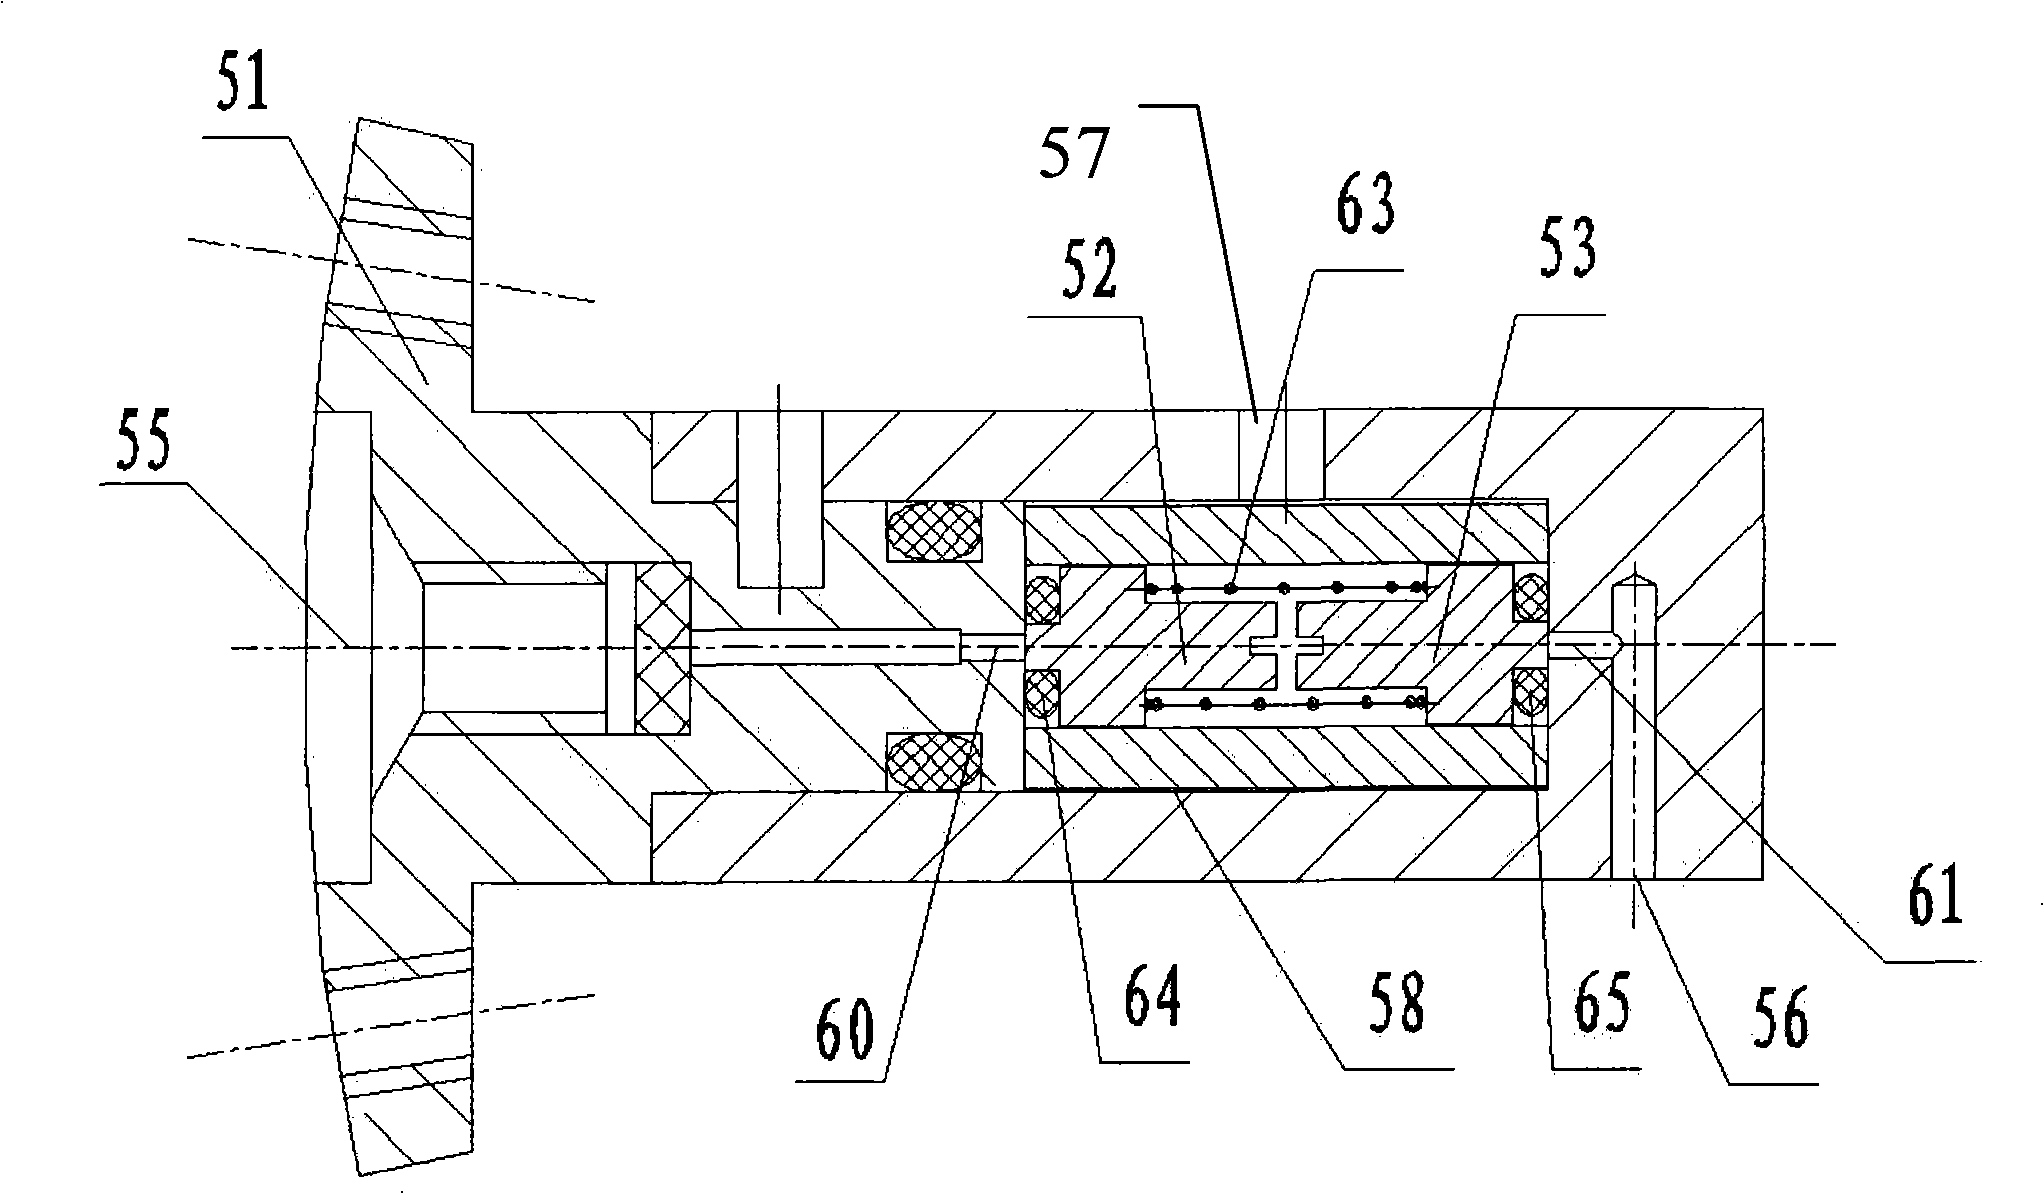 Refrigeration system used in infrared receiver